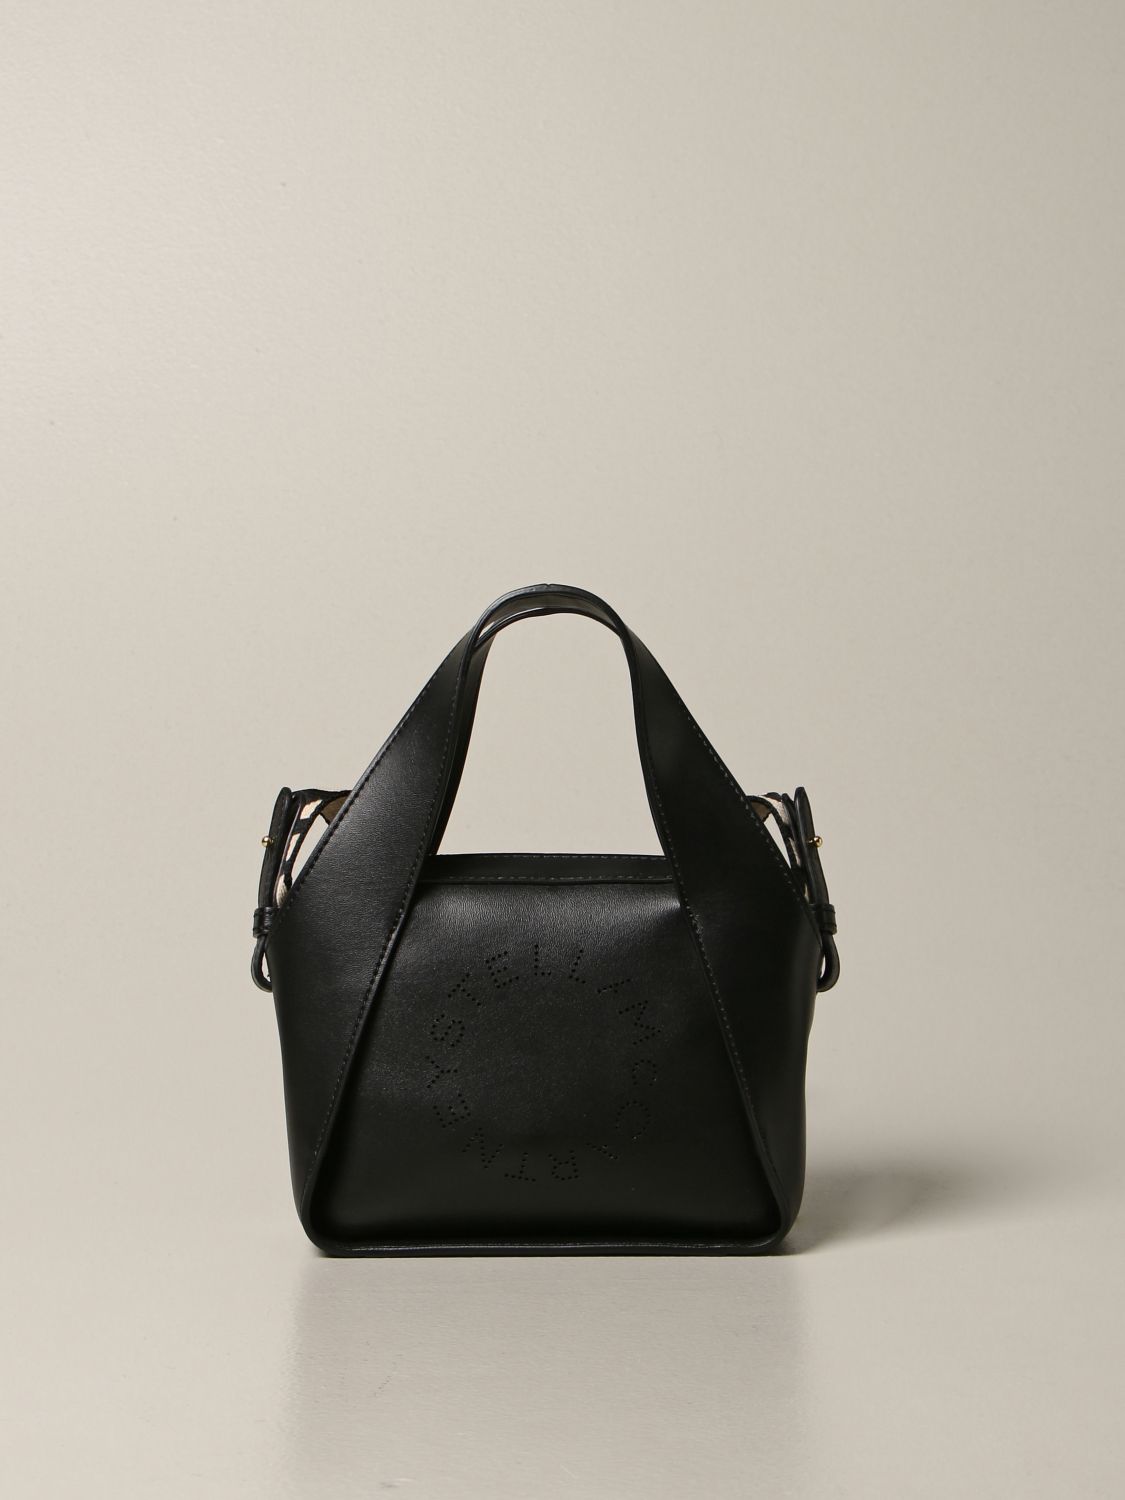 Stella McCartney shoulder bag in synthetic leather with perforated logo